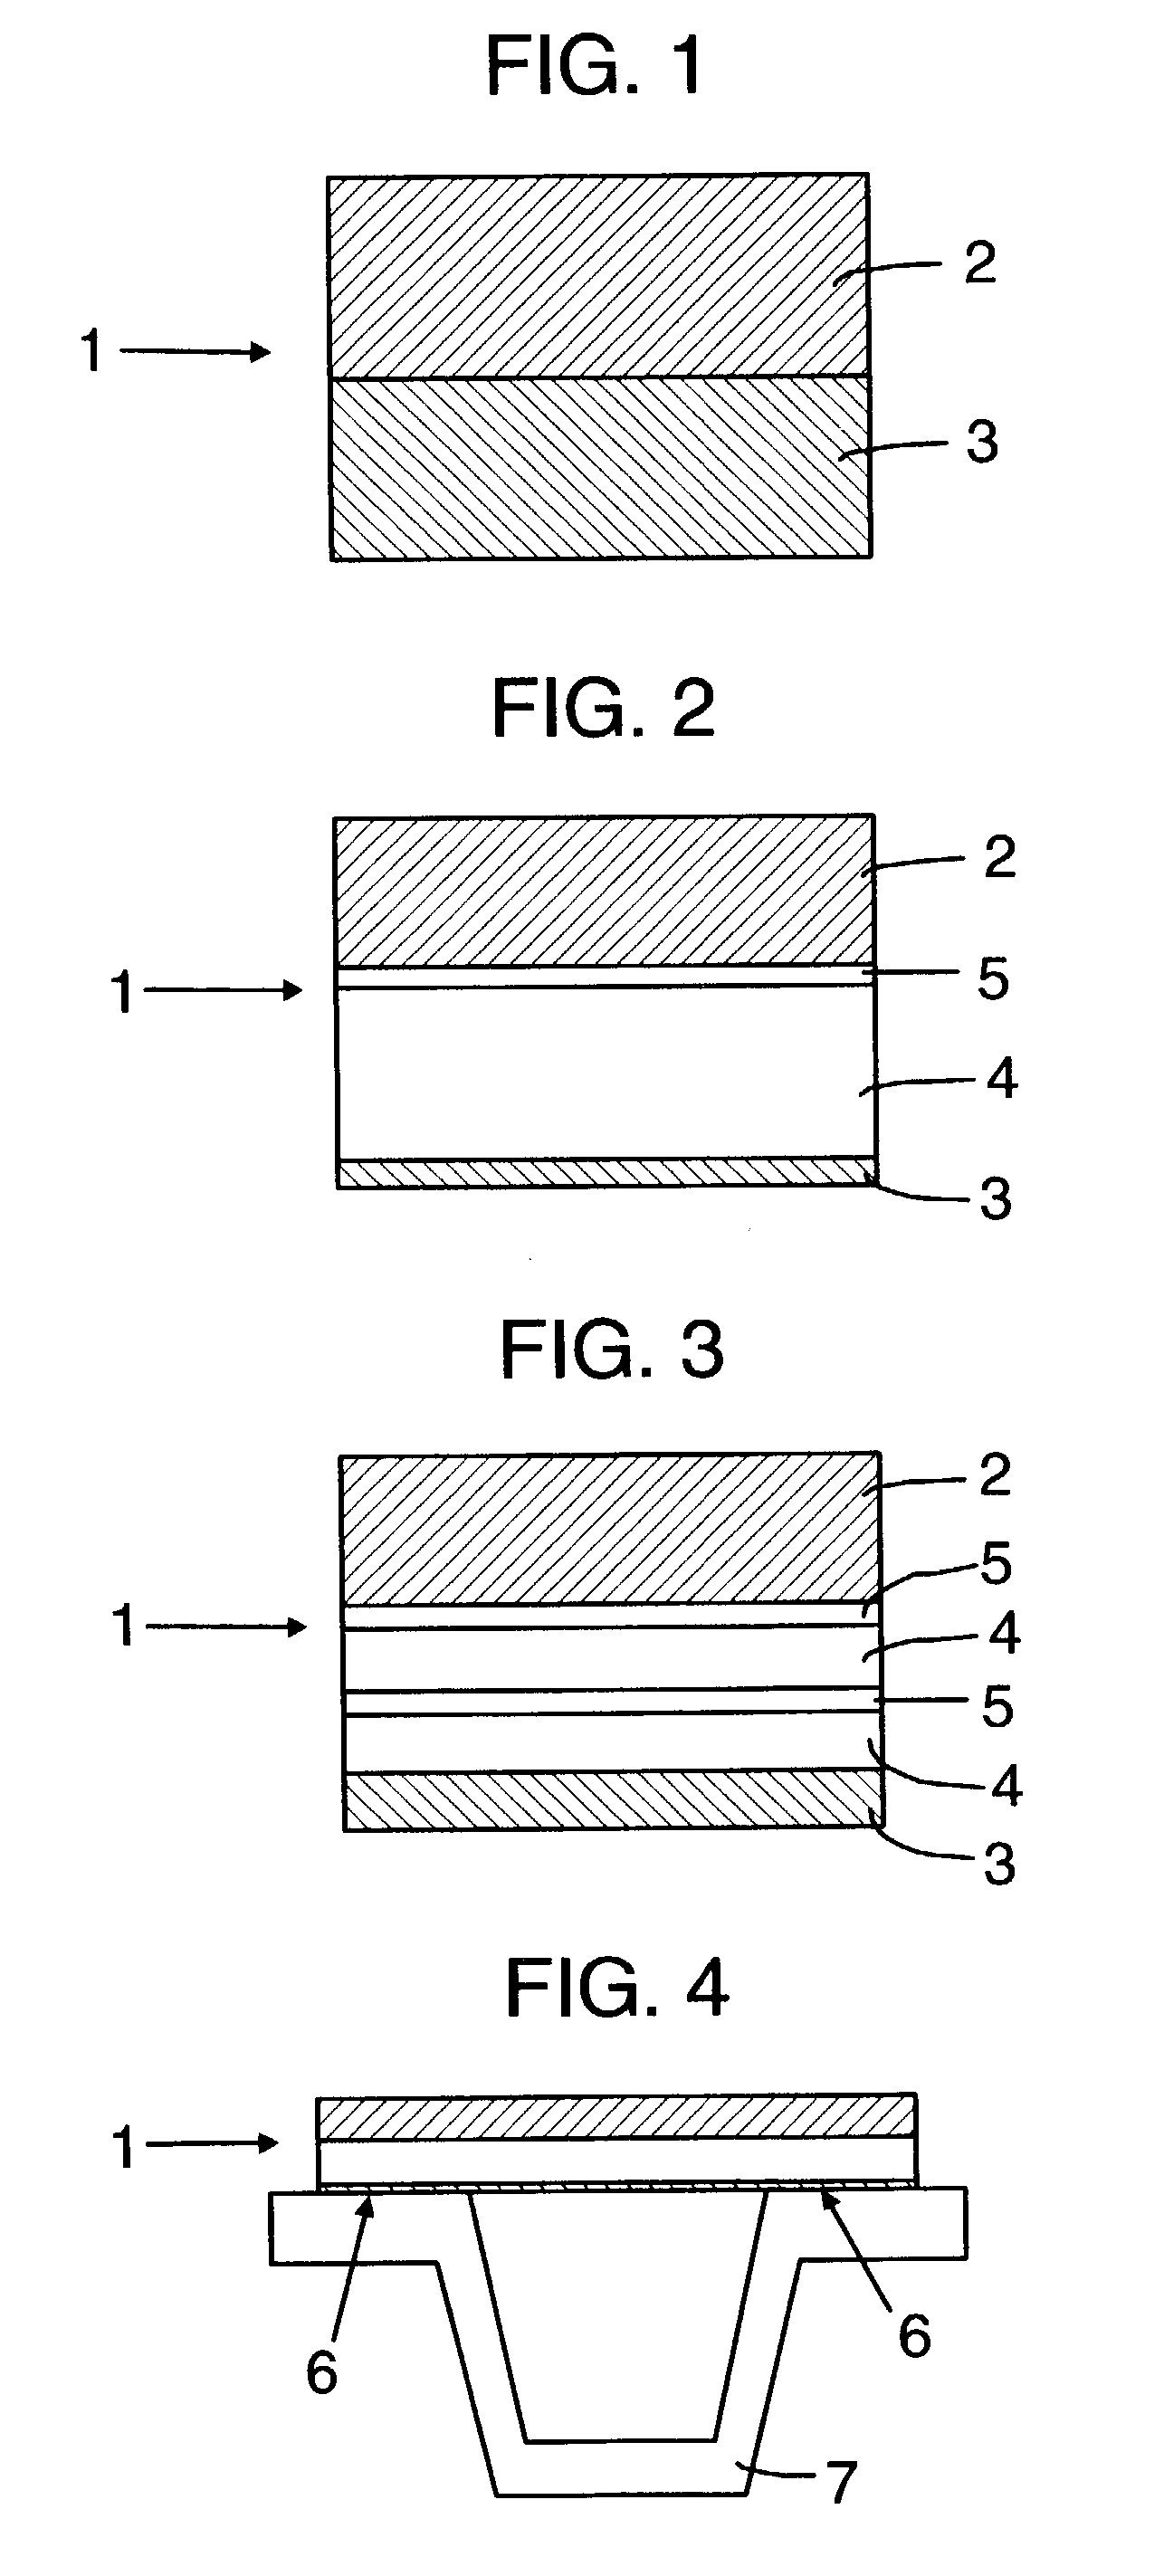 Cover tape for packaging electronic elements